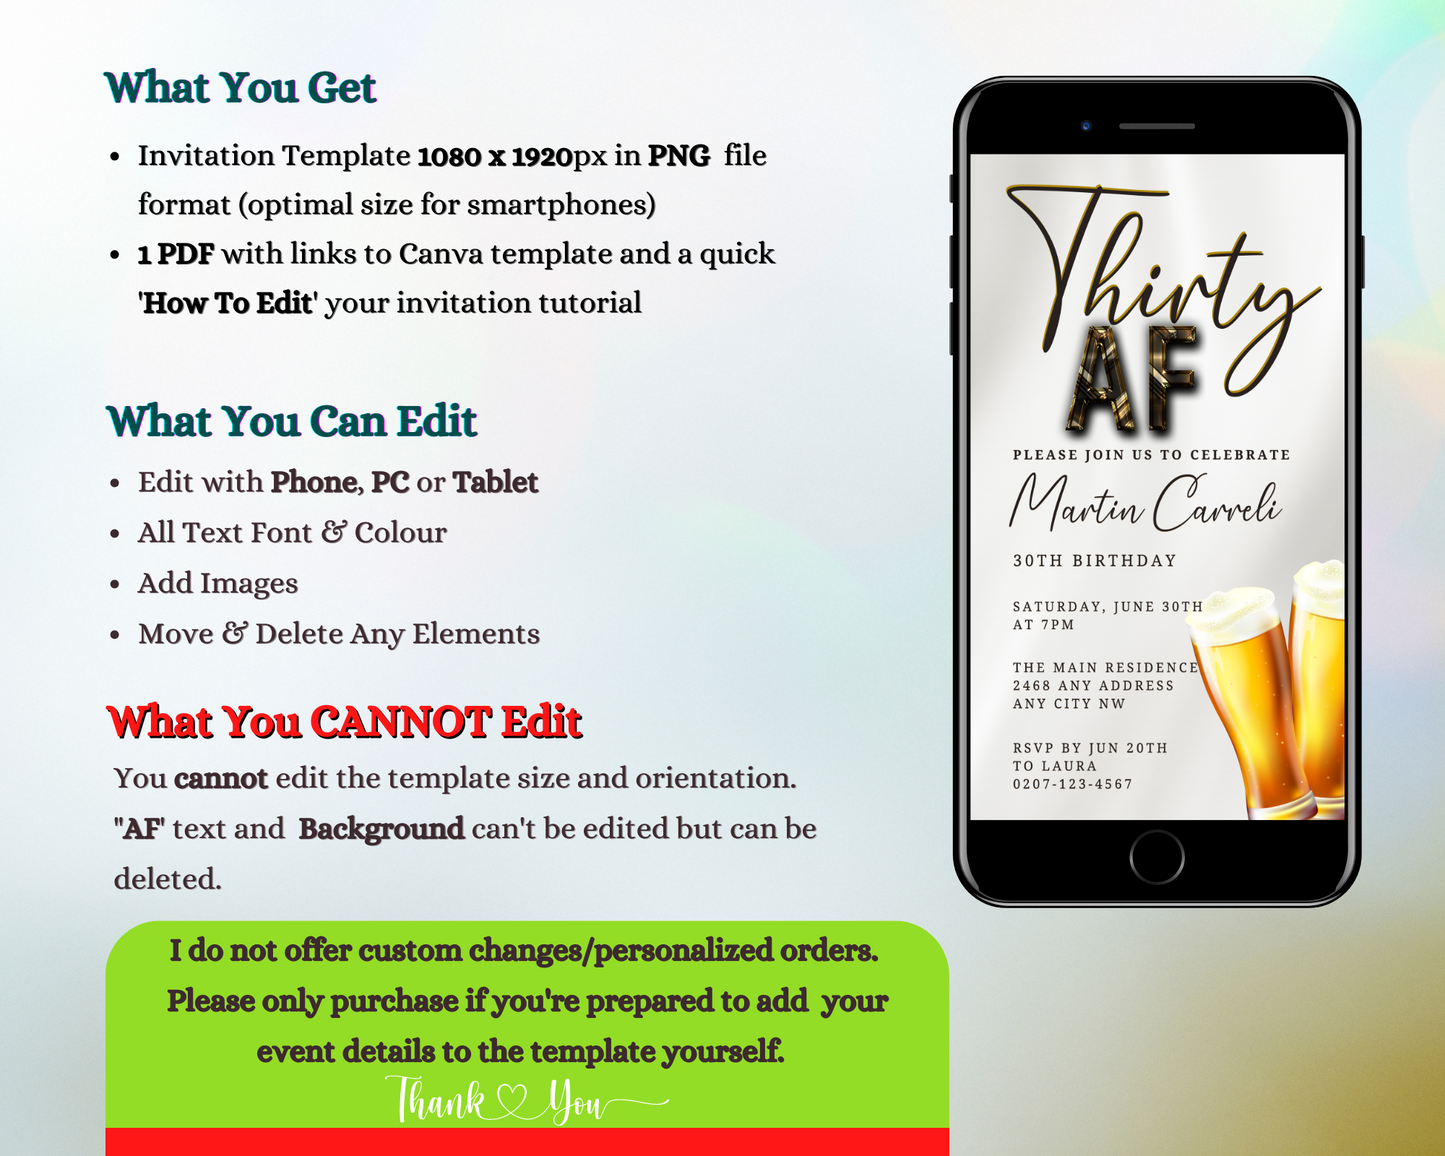 Customizable digital invitation template for a Thirty AF beer-themed party, displayed on a smartphone screen with editable text and event details.